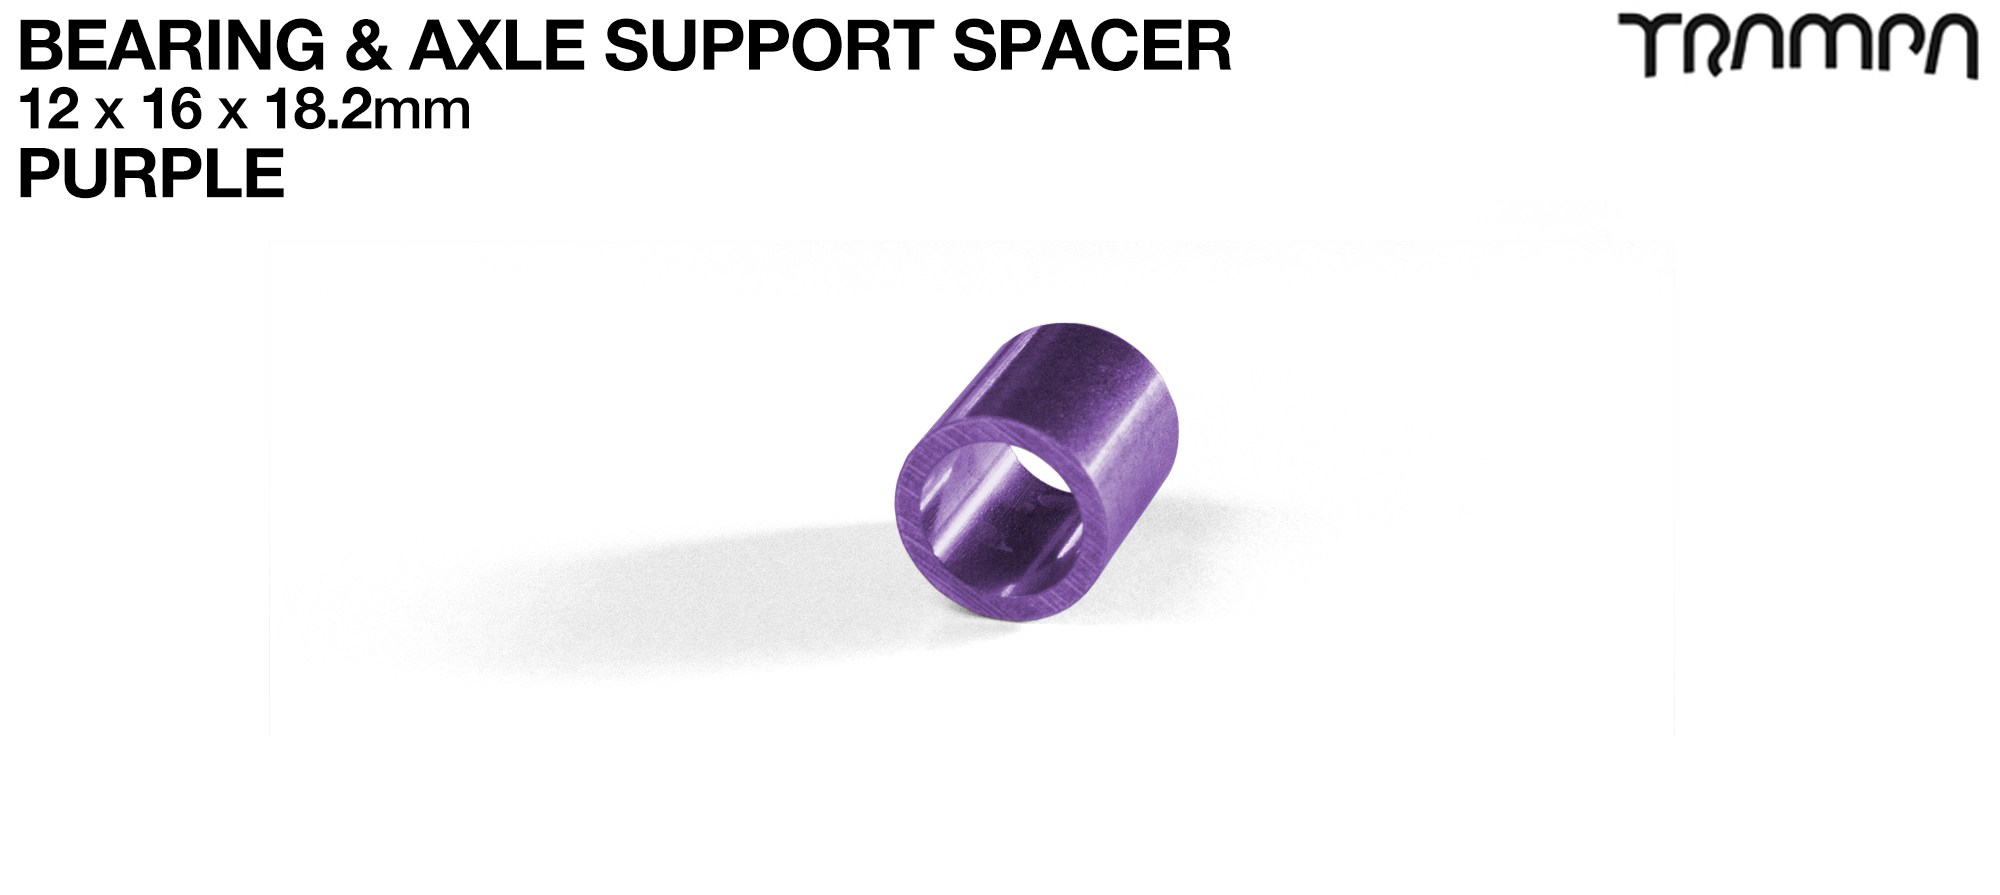 18.2mm Wheel Support Axle Spacers - PURPLE x4